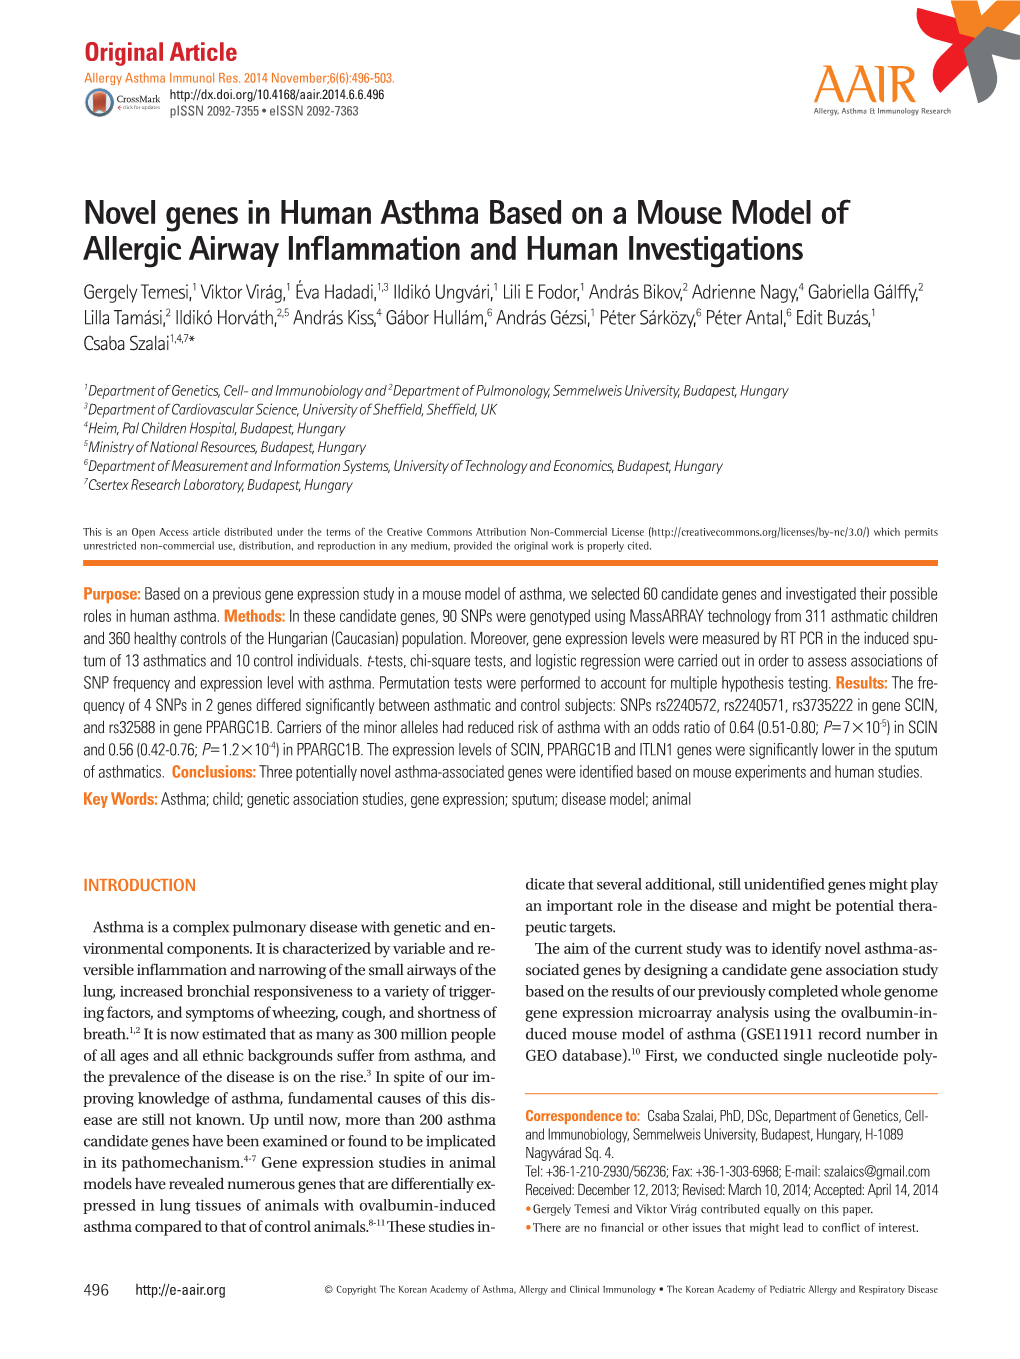 Novel Genes in Human Asthma Based on a Mouse Model of Allergic